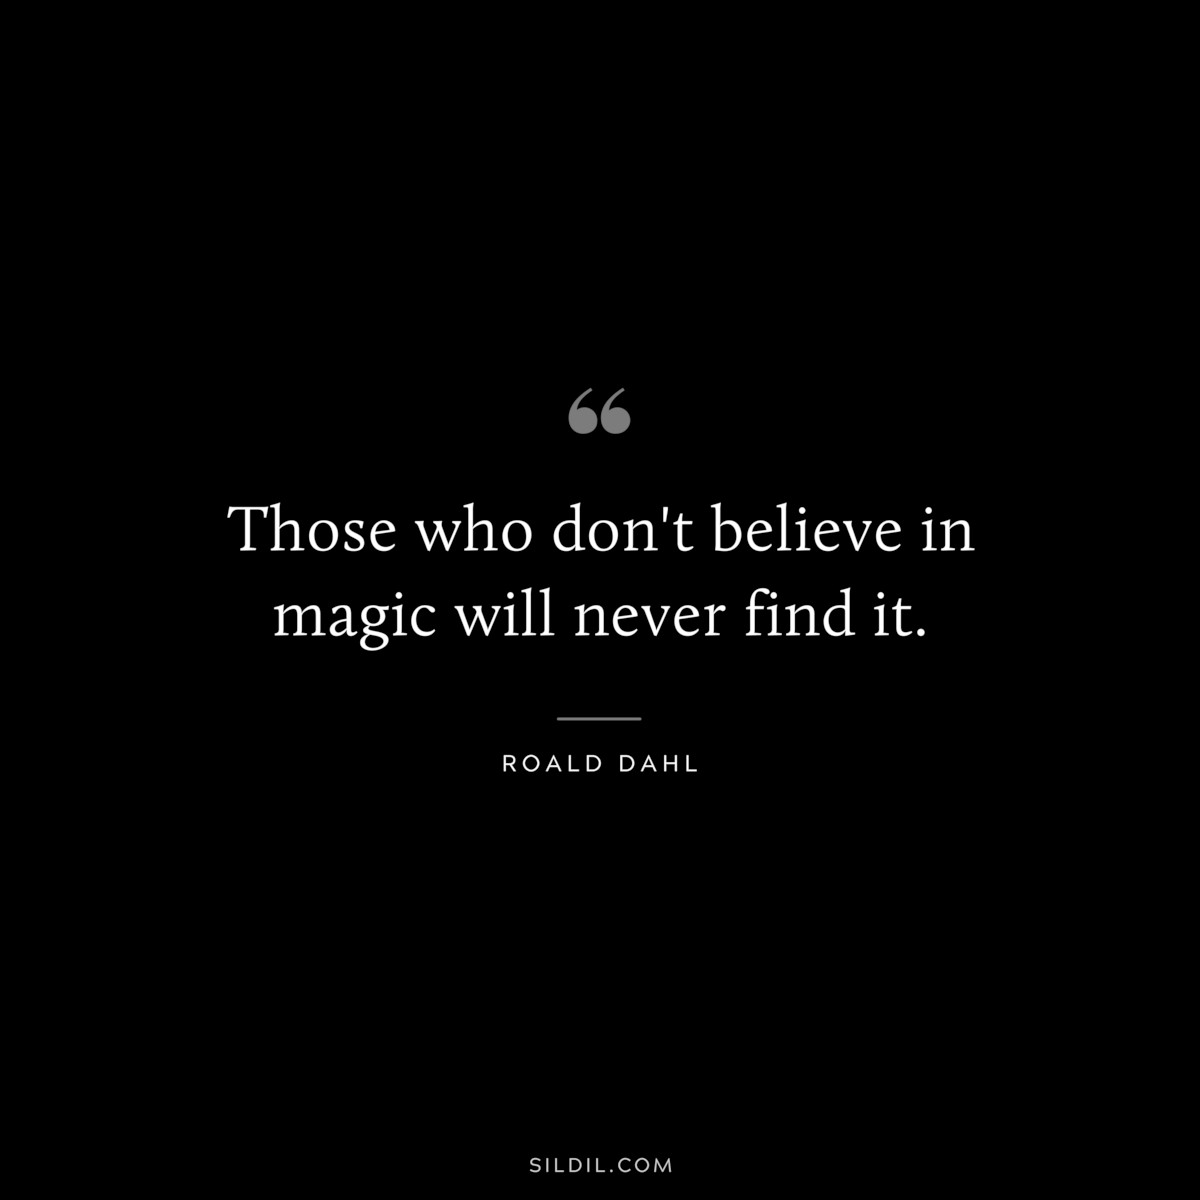 Those who don't believe in magic will never find it. ― Roald Dahl